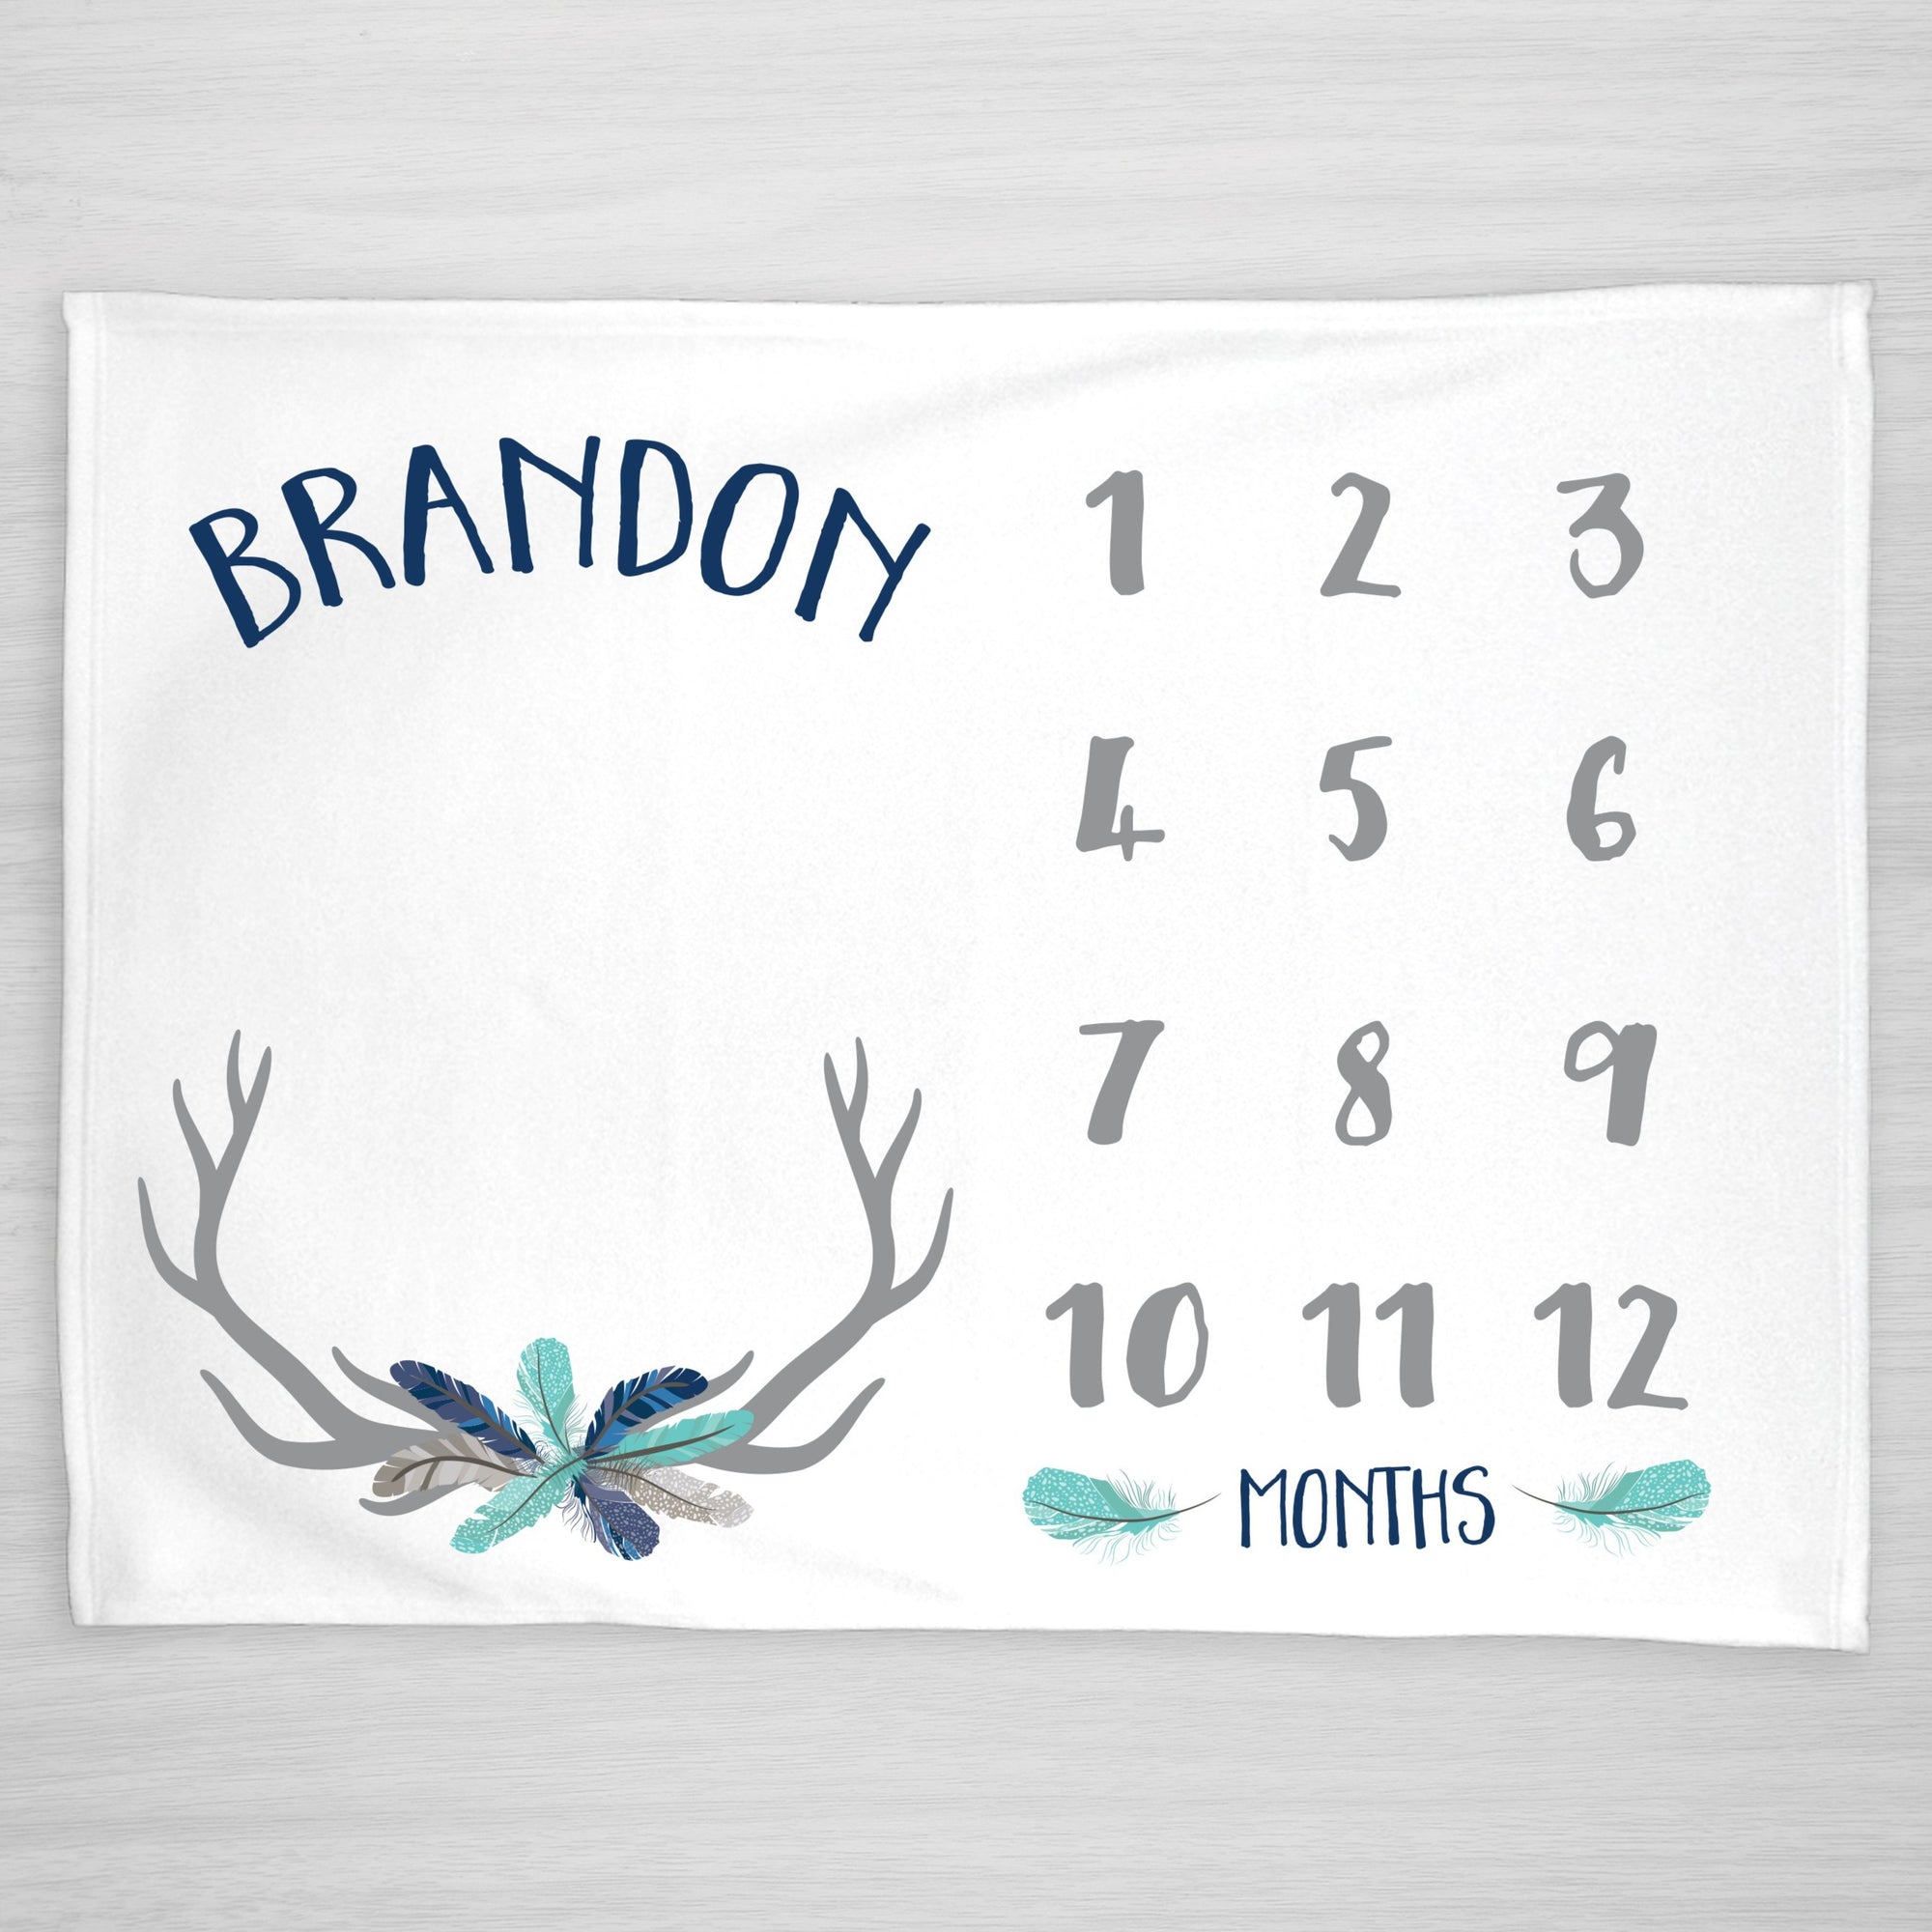 Deer Antler and Feather Baby Milestone blanket, in navy blue, aqua, and gray, personalized